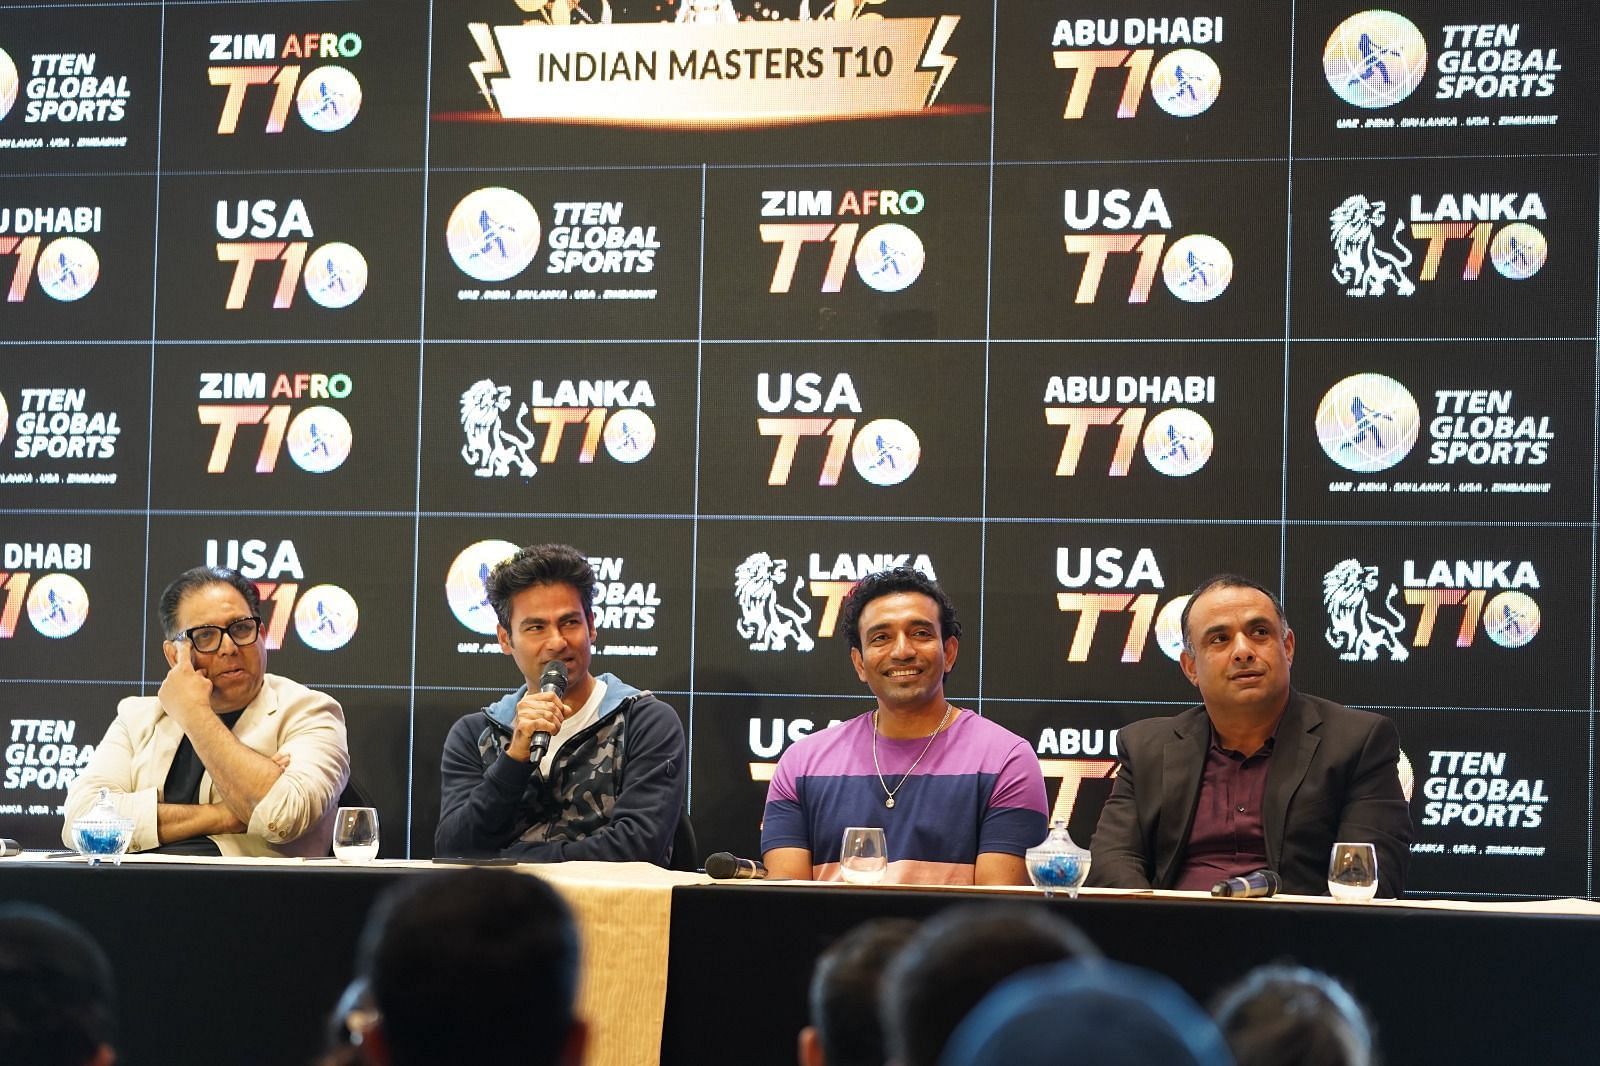 Mohammed Kaif interacting with members of the press on Monday Image Via Business of Sports/SportsKeeda